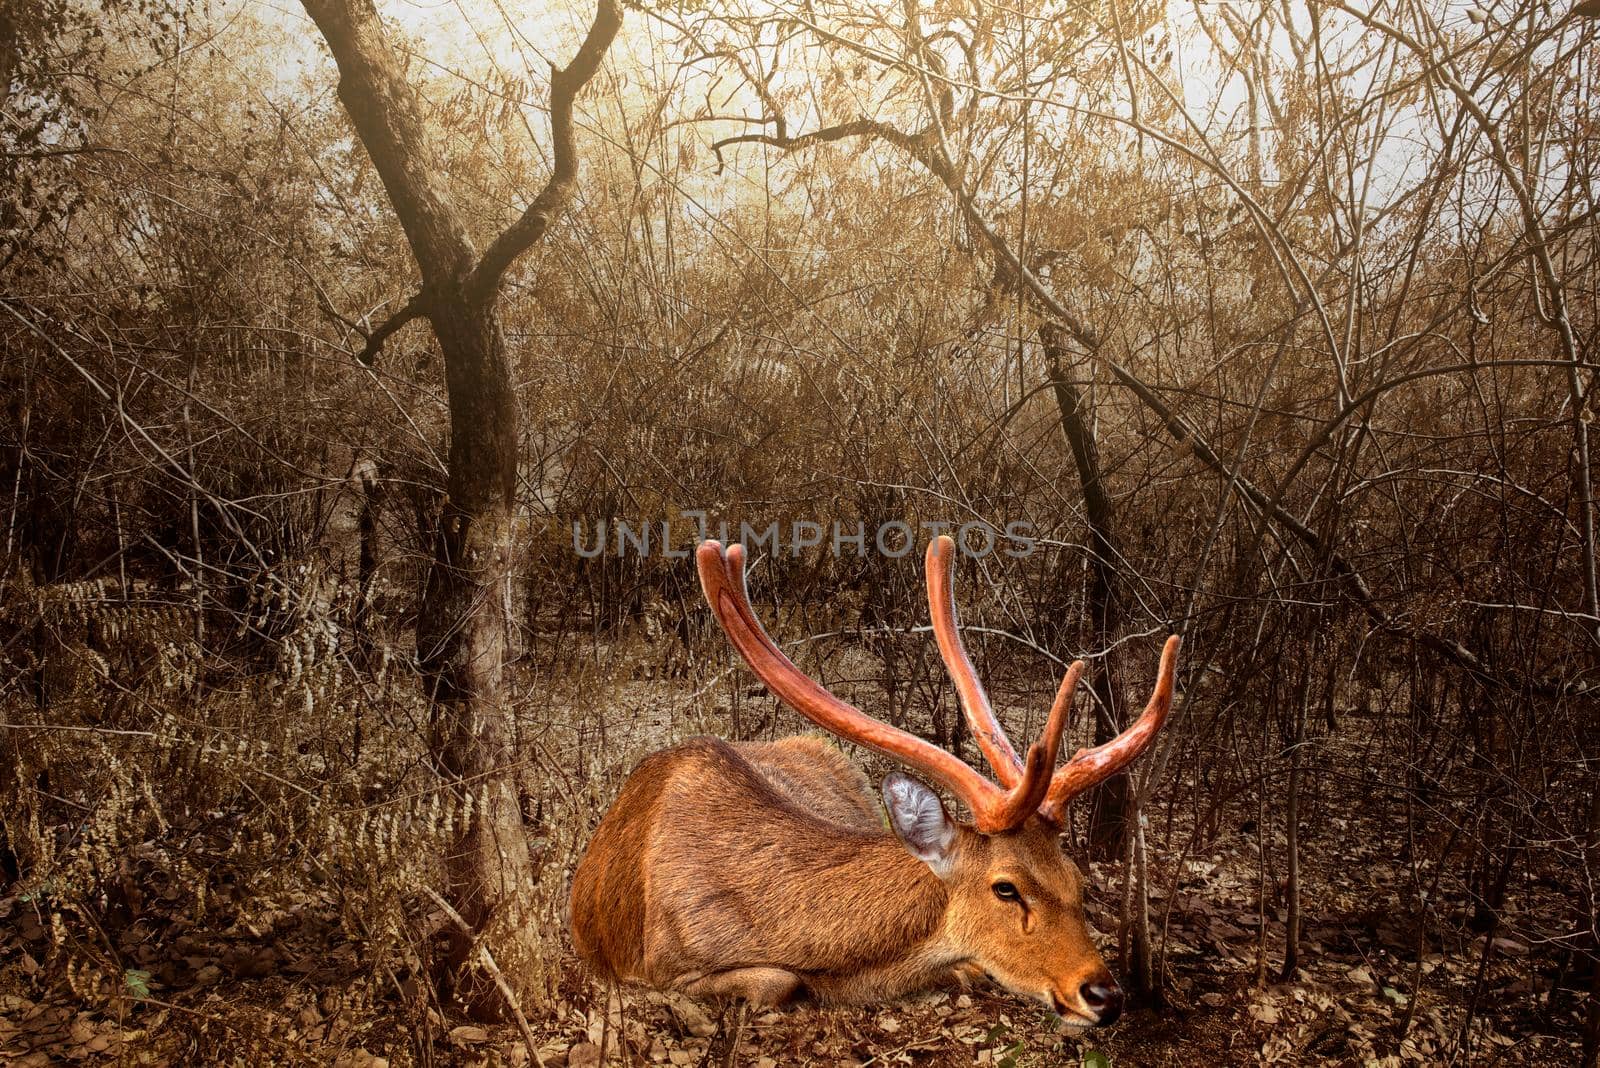 Brown deer resting in a dry, arid environment. by thanumporn